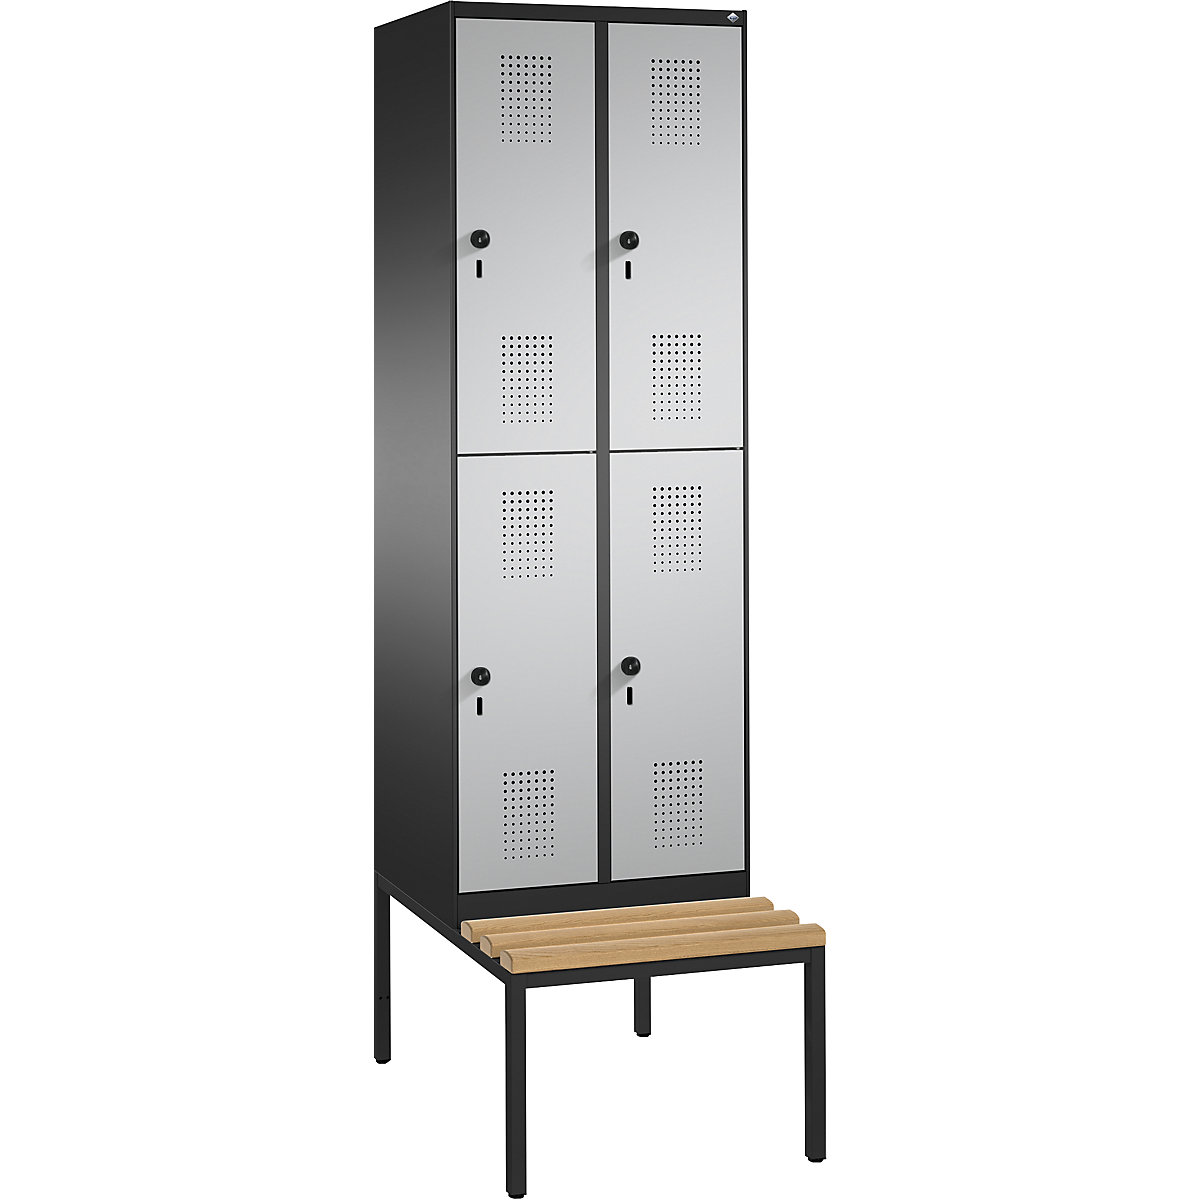 EVOLO cloakroom locker, double tier, with bench – C+P, 2 compartments, 2 shelf compartments each, compartment width 300 mm, black grey / white aluminium-11